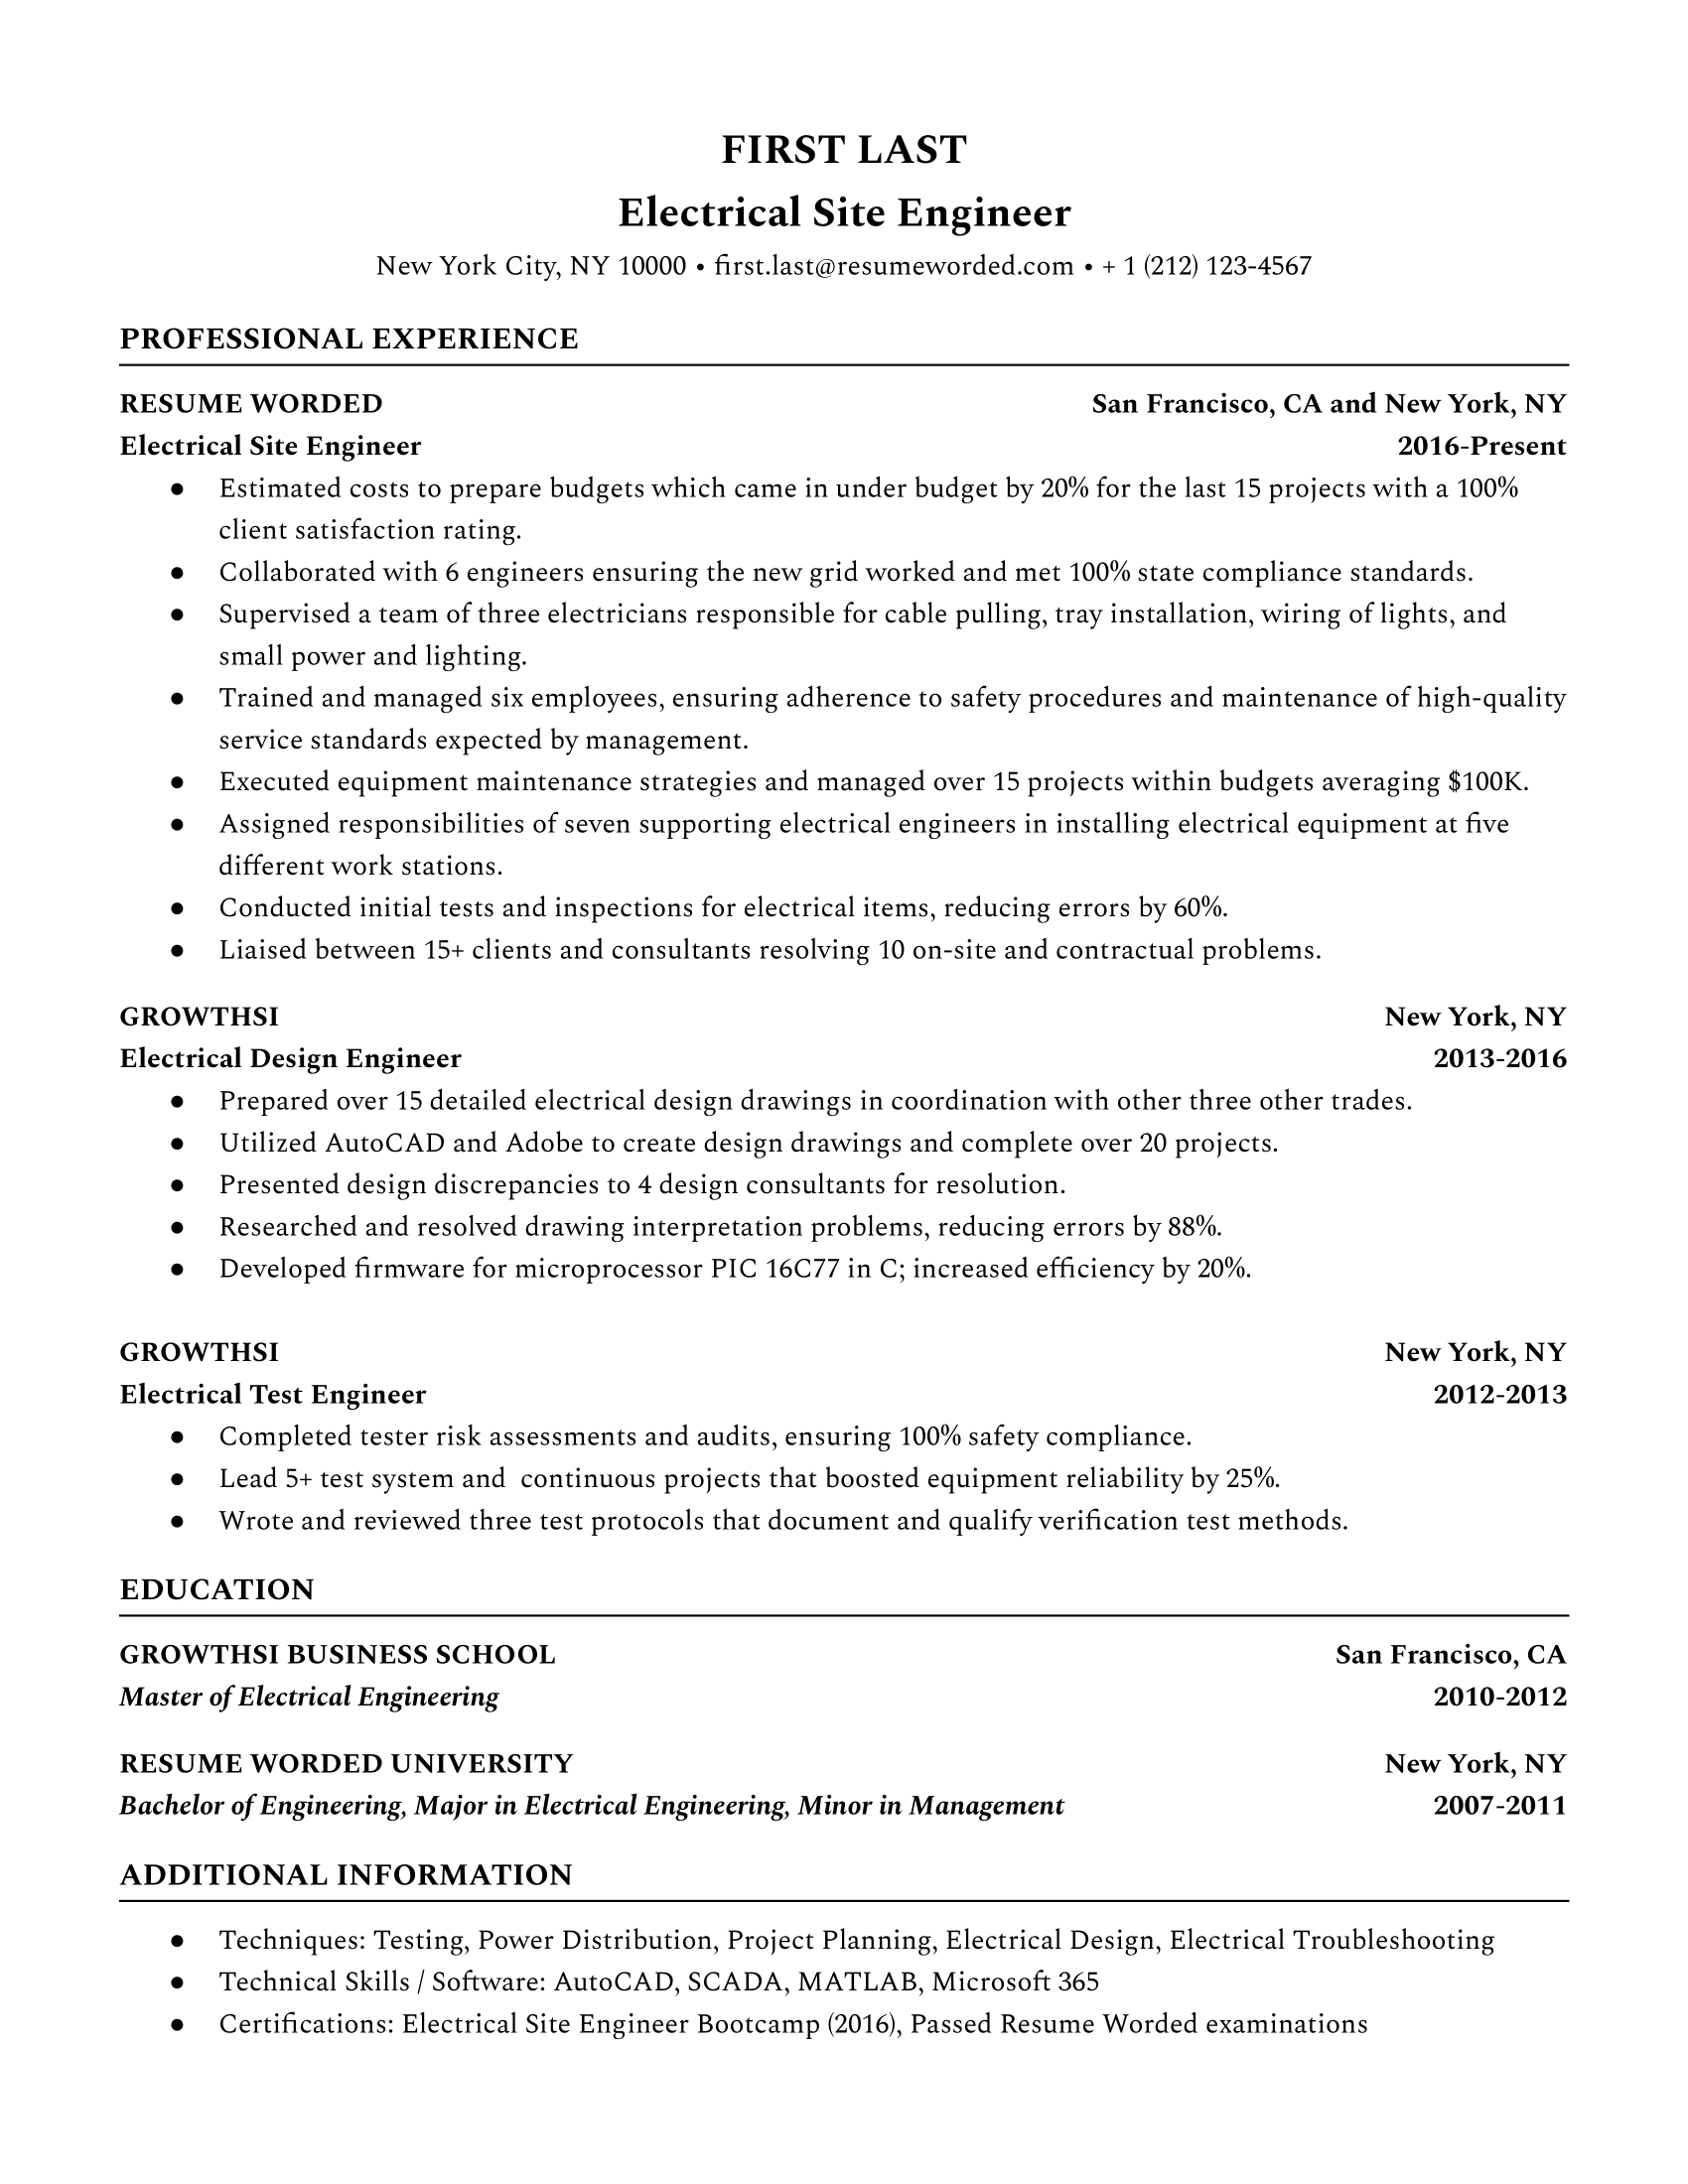 Electrical Site Engineer Resume Template + Example